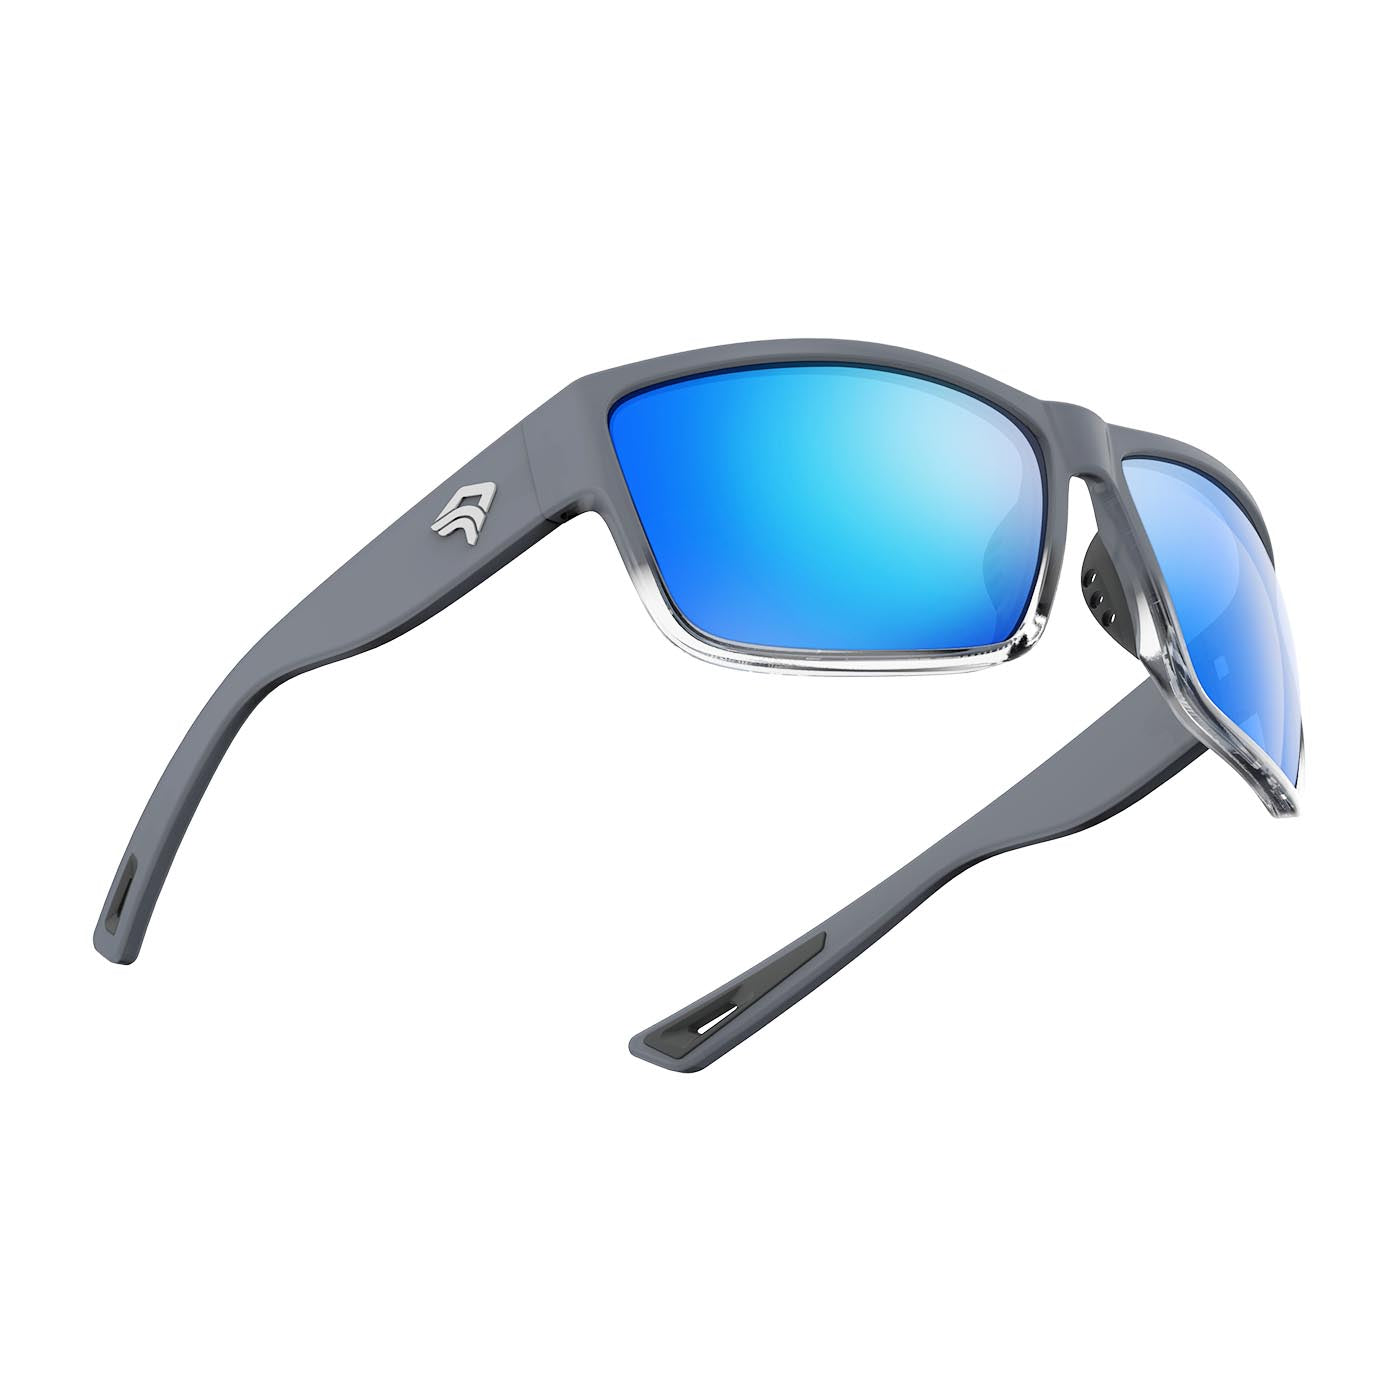 Pure Polarized Sports Sunglasses with Ideal Flexible for Women Fishing - - Transparent and Half and Matte Warranty Grey and - - Frame for Running, To Ideal Cycling, Men Adjustable Golf, Lifetime